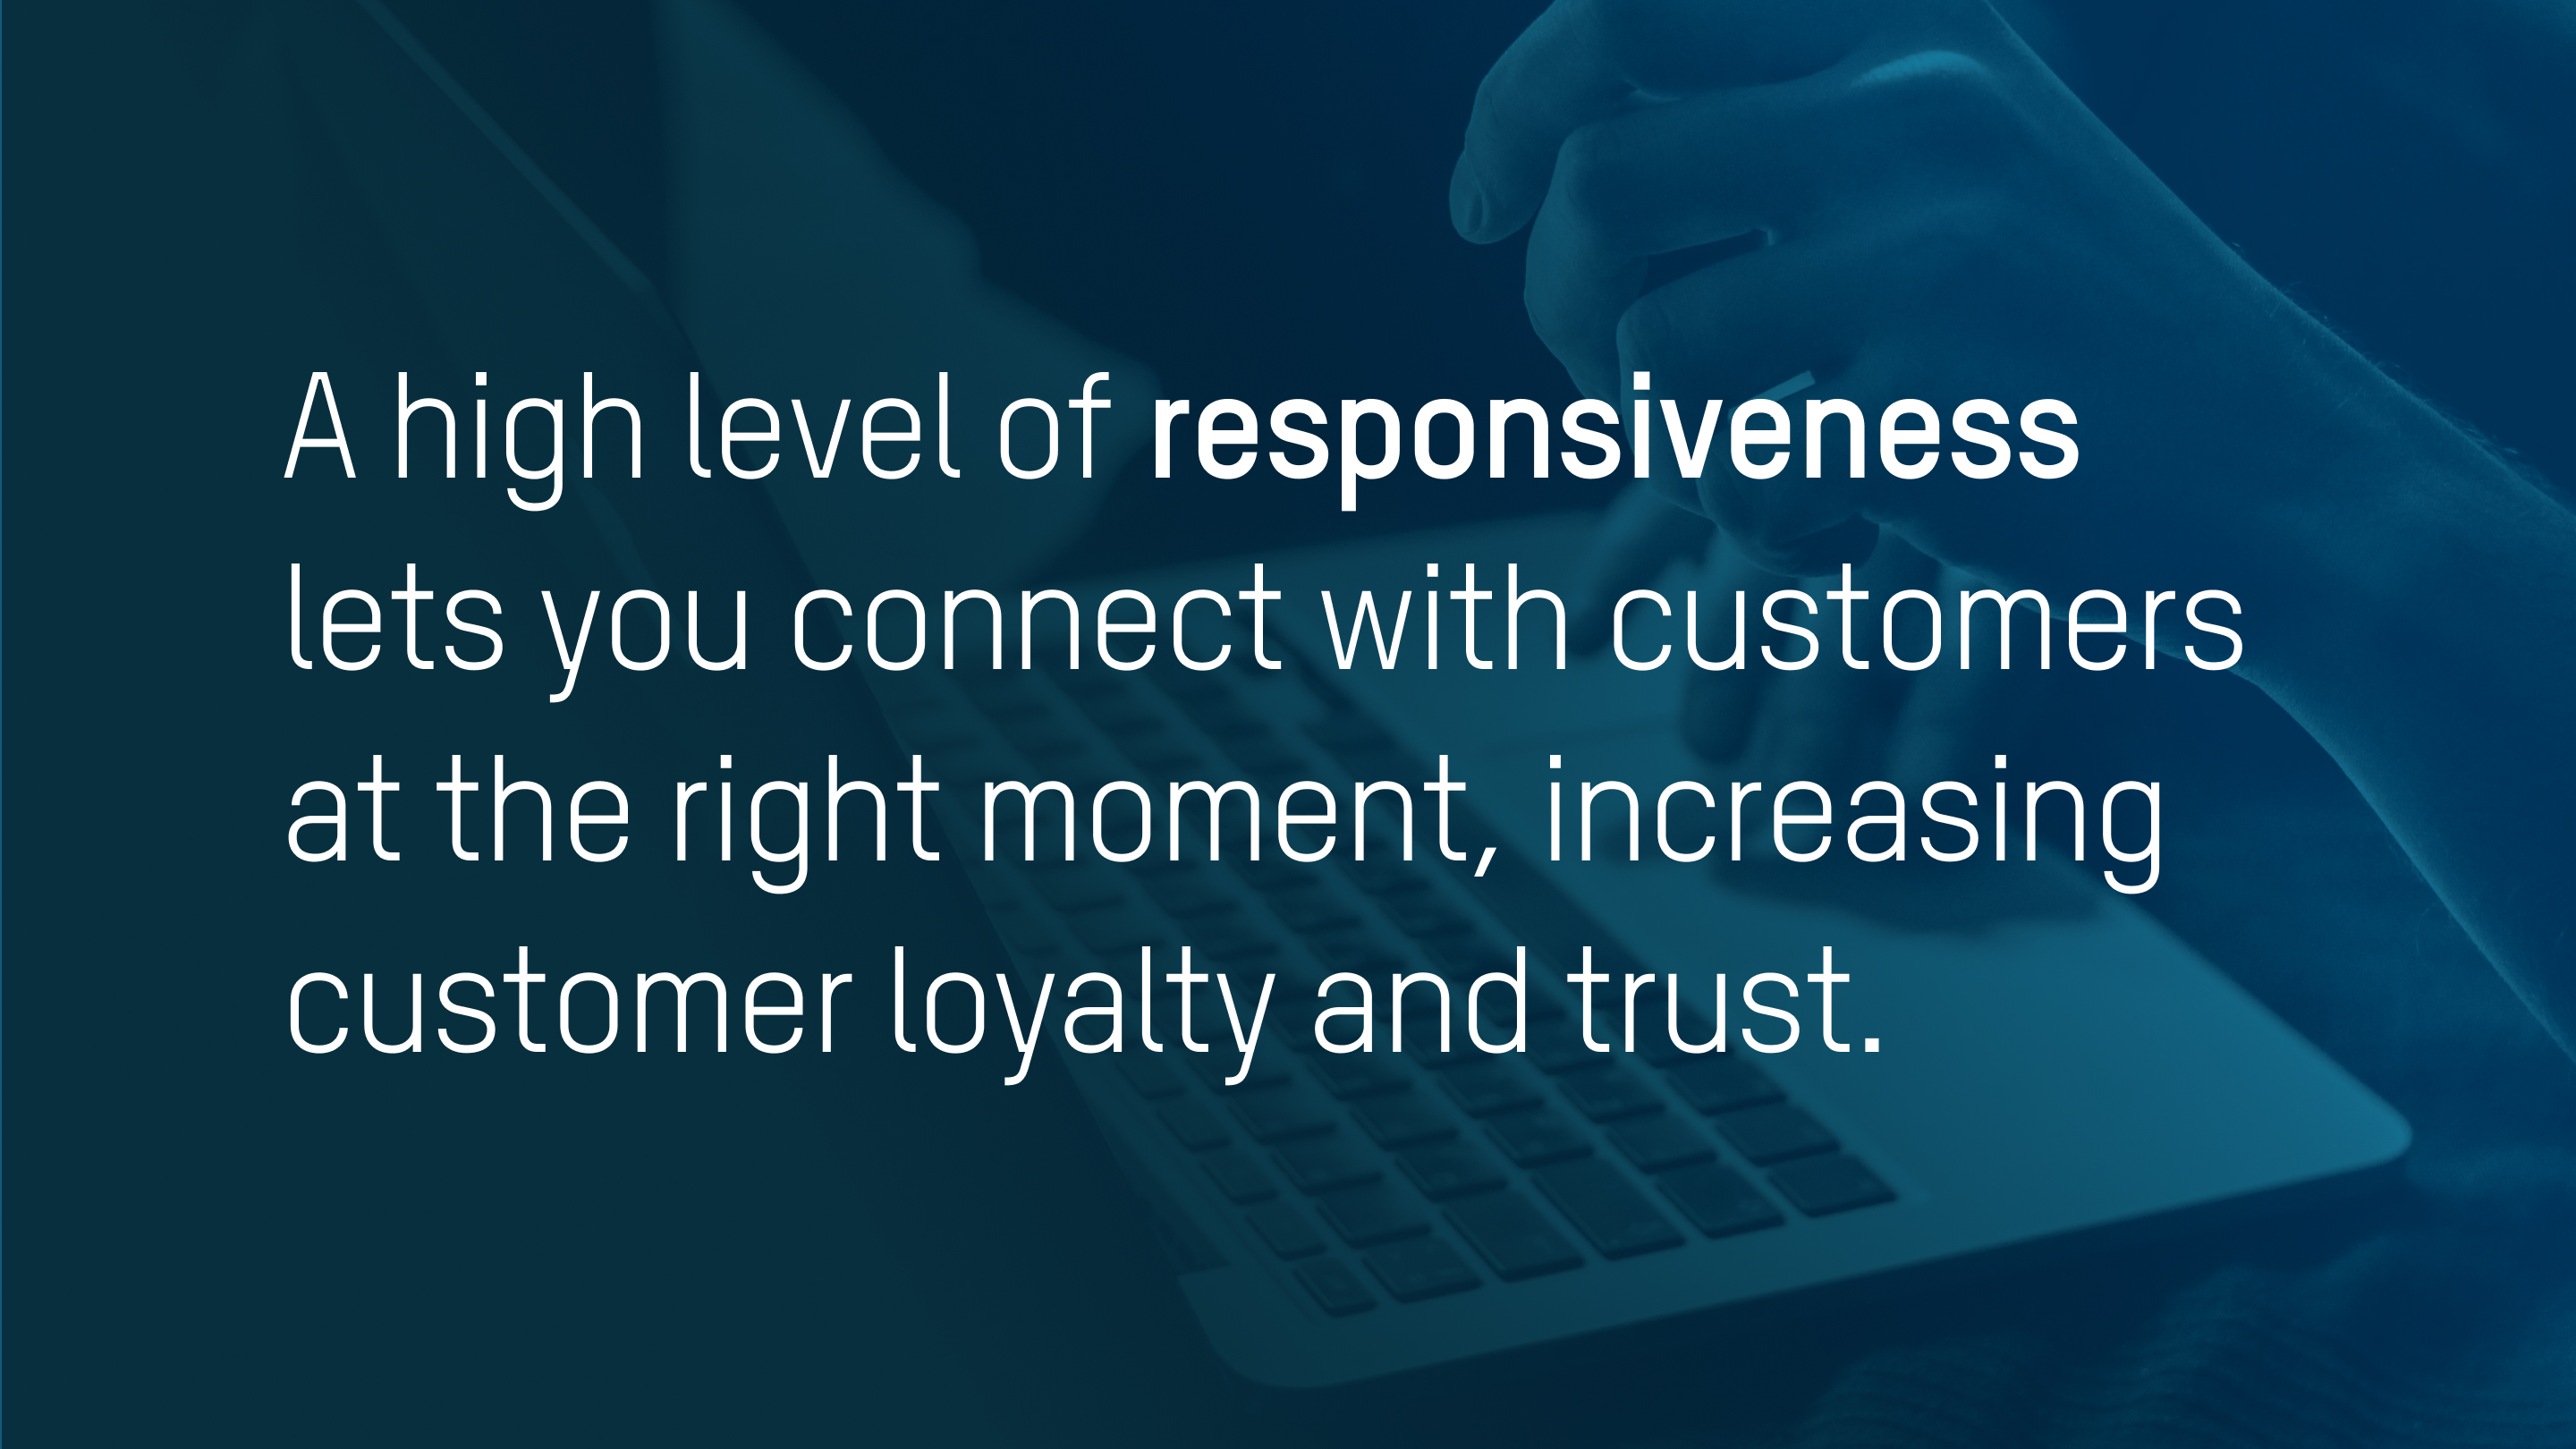 Responsiveness increases customer loyalty and trust